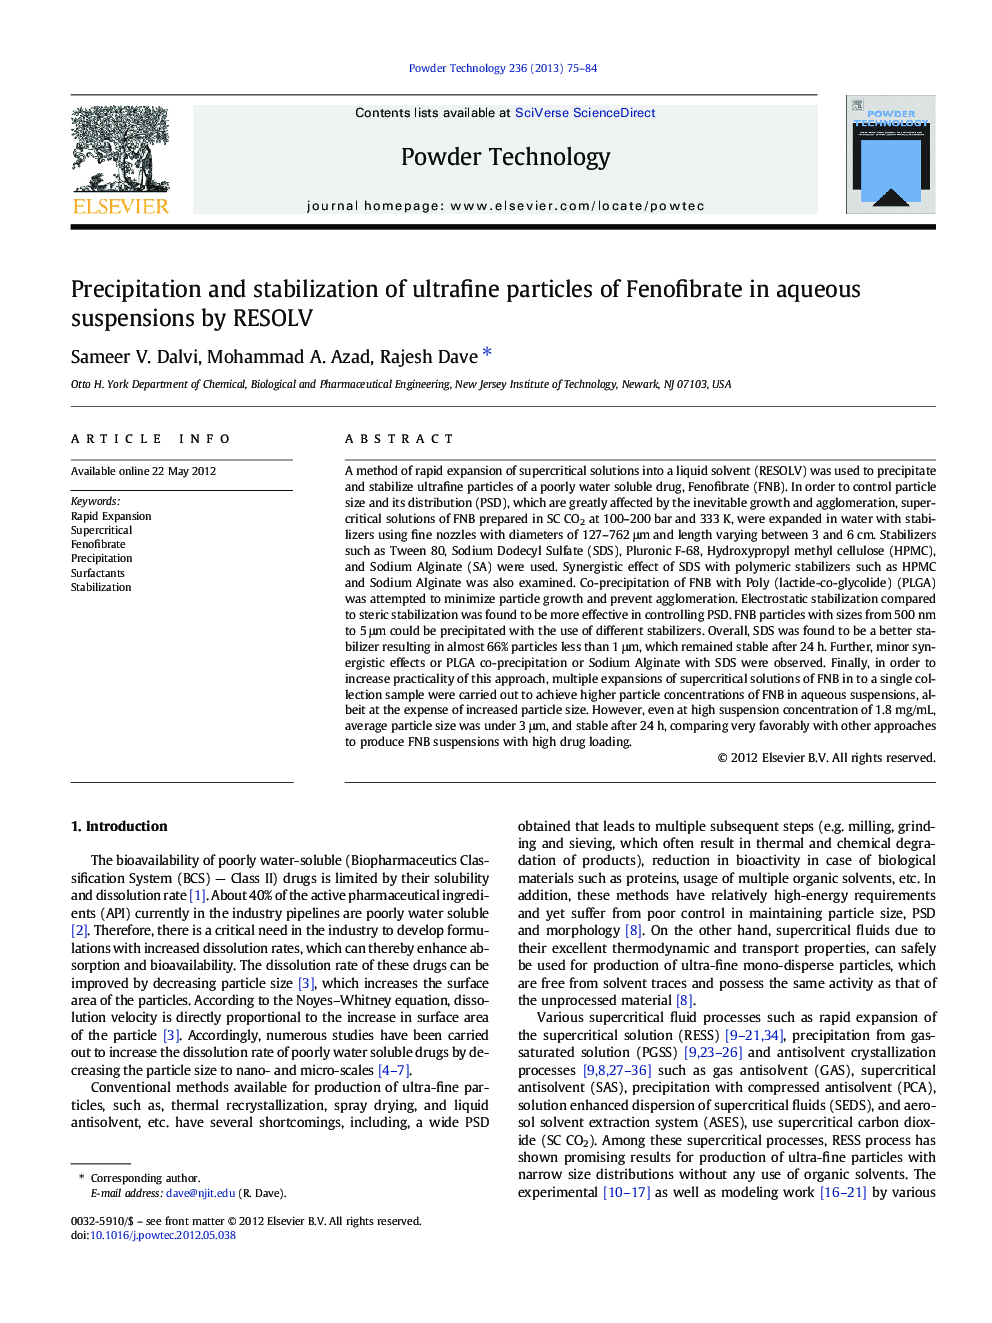 Precipitation and stabilization of ultrafine particles of Fenofibrate in aqueous suspensions by RESOLV